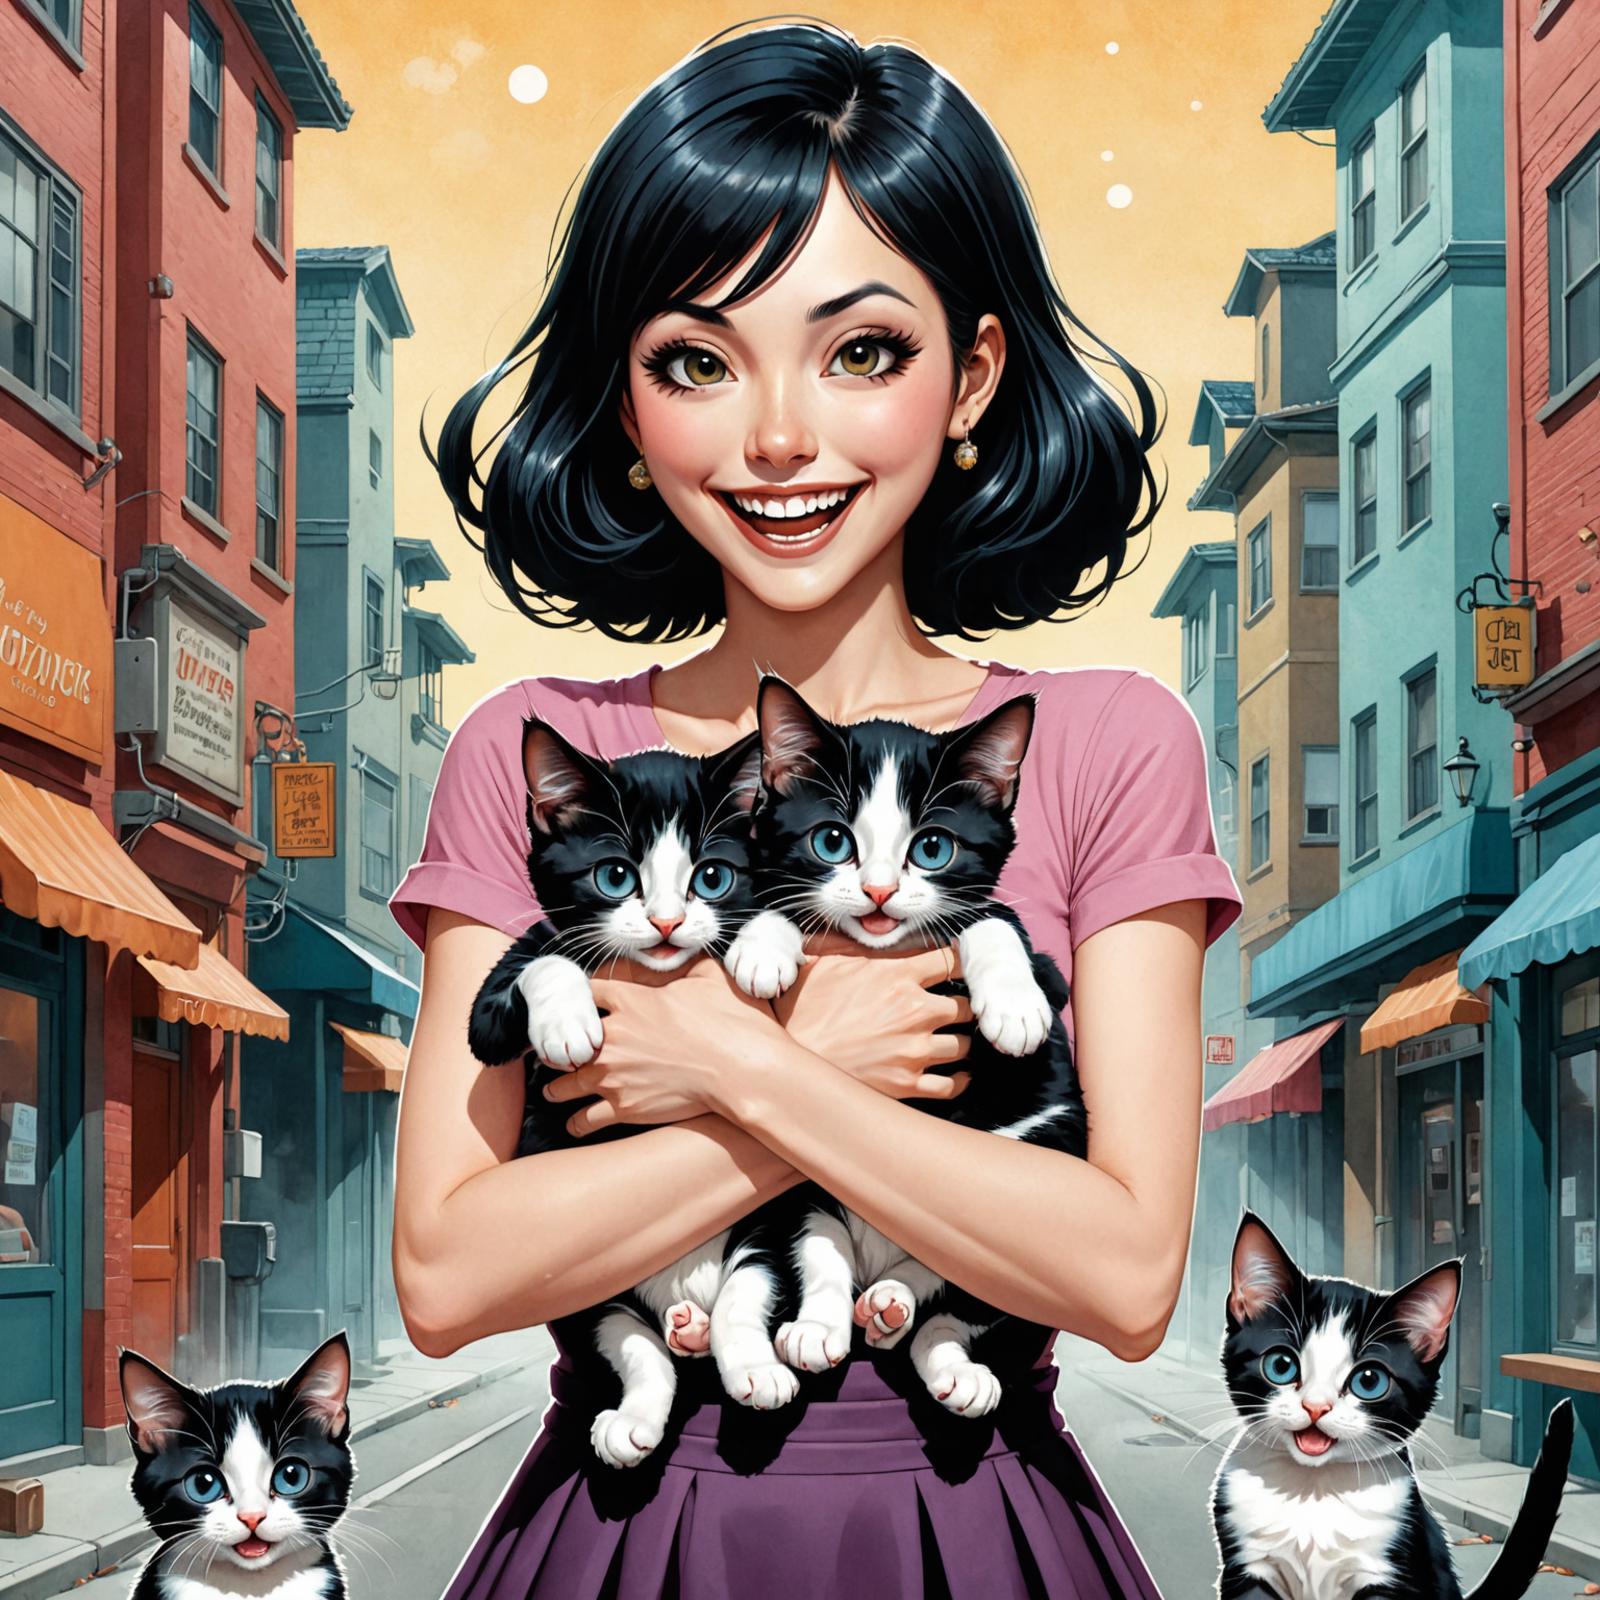 A woman holding two black and white kittens on a city street.